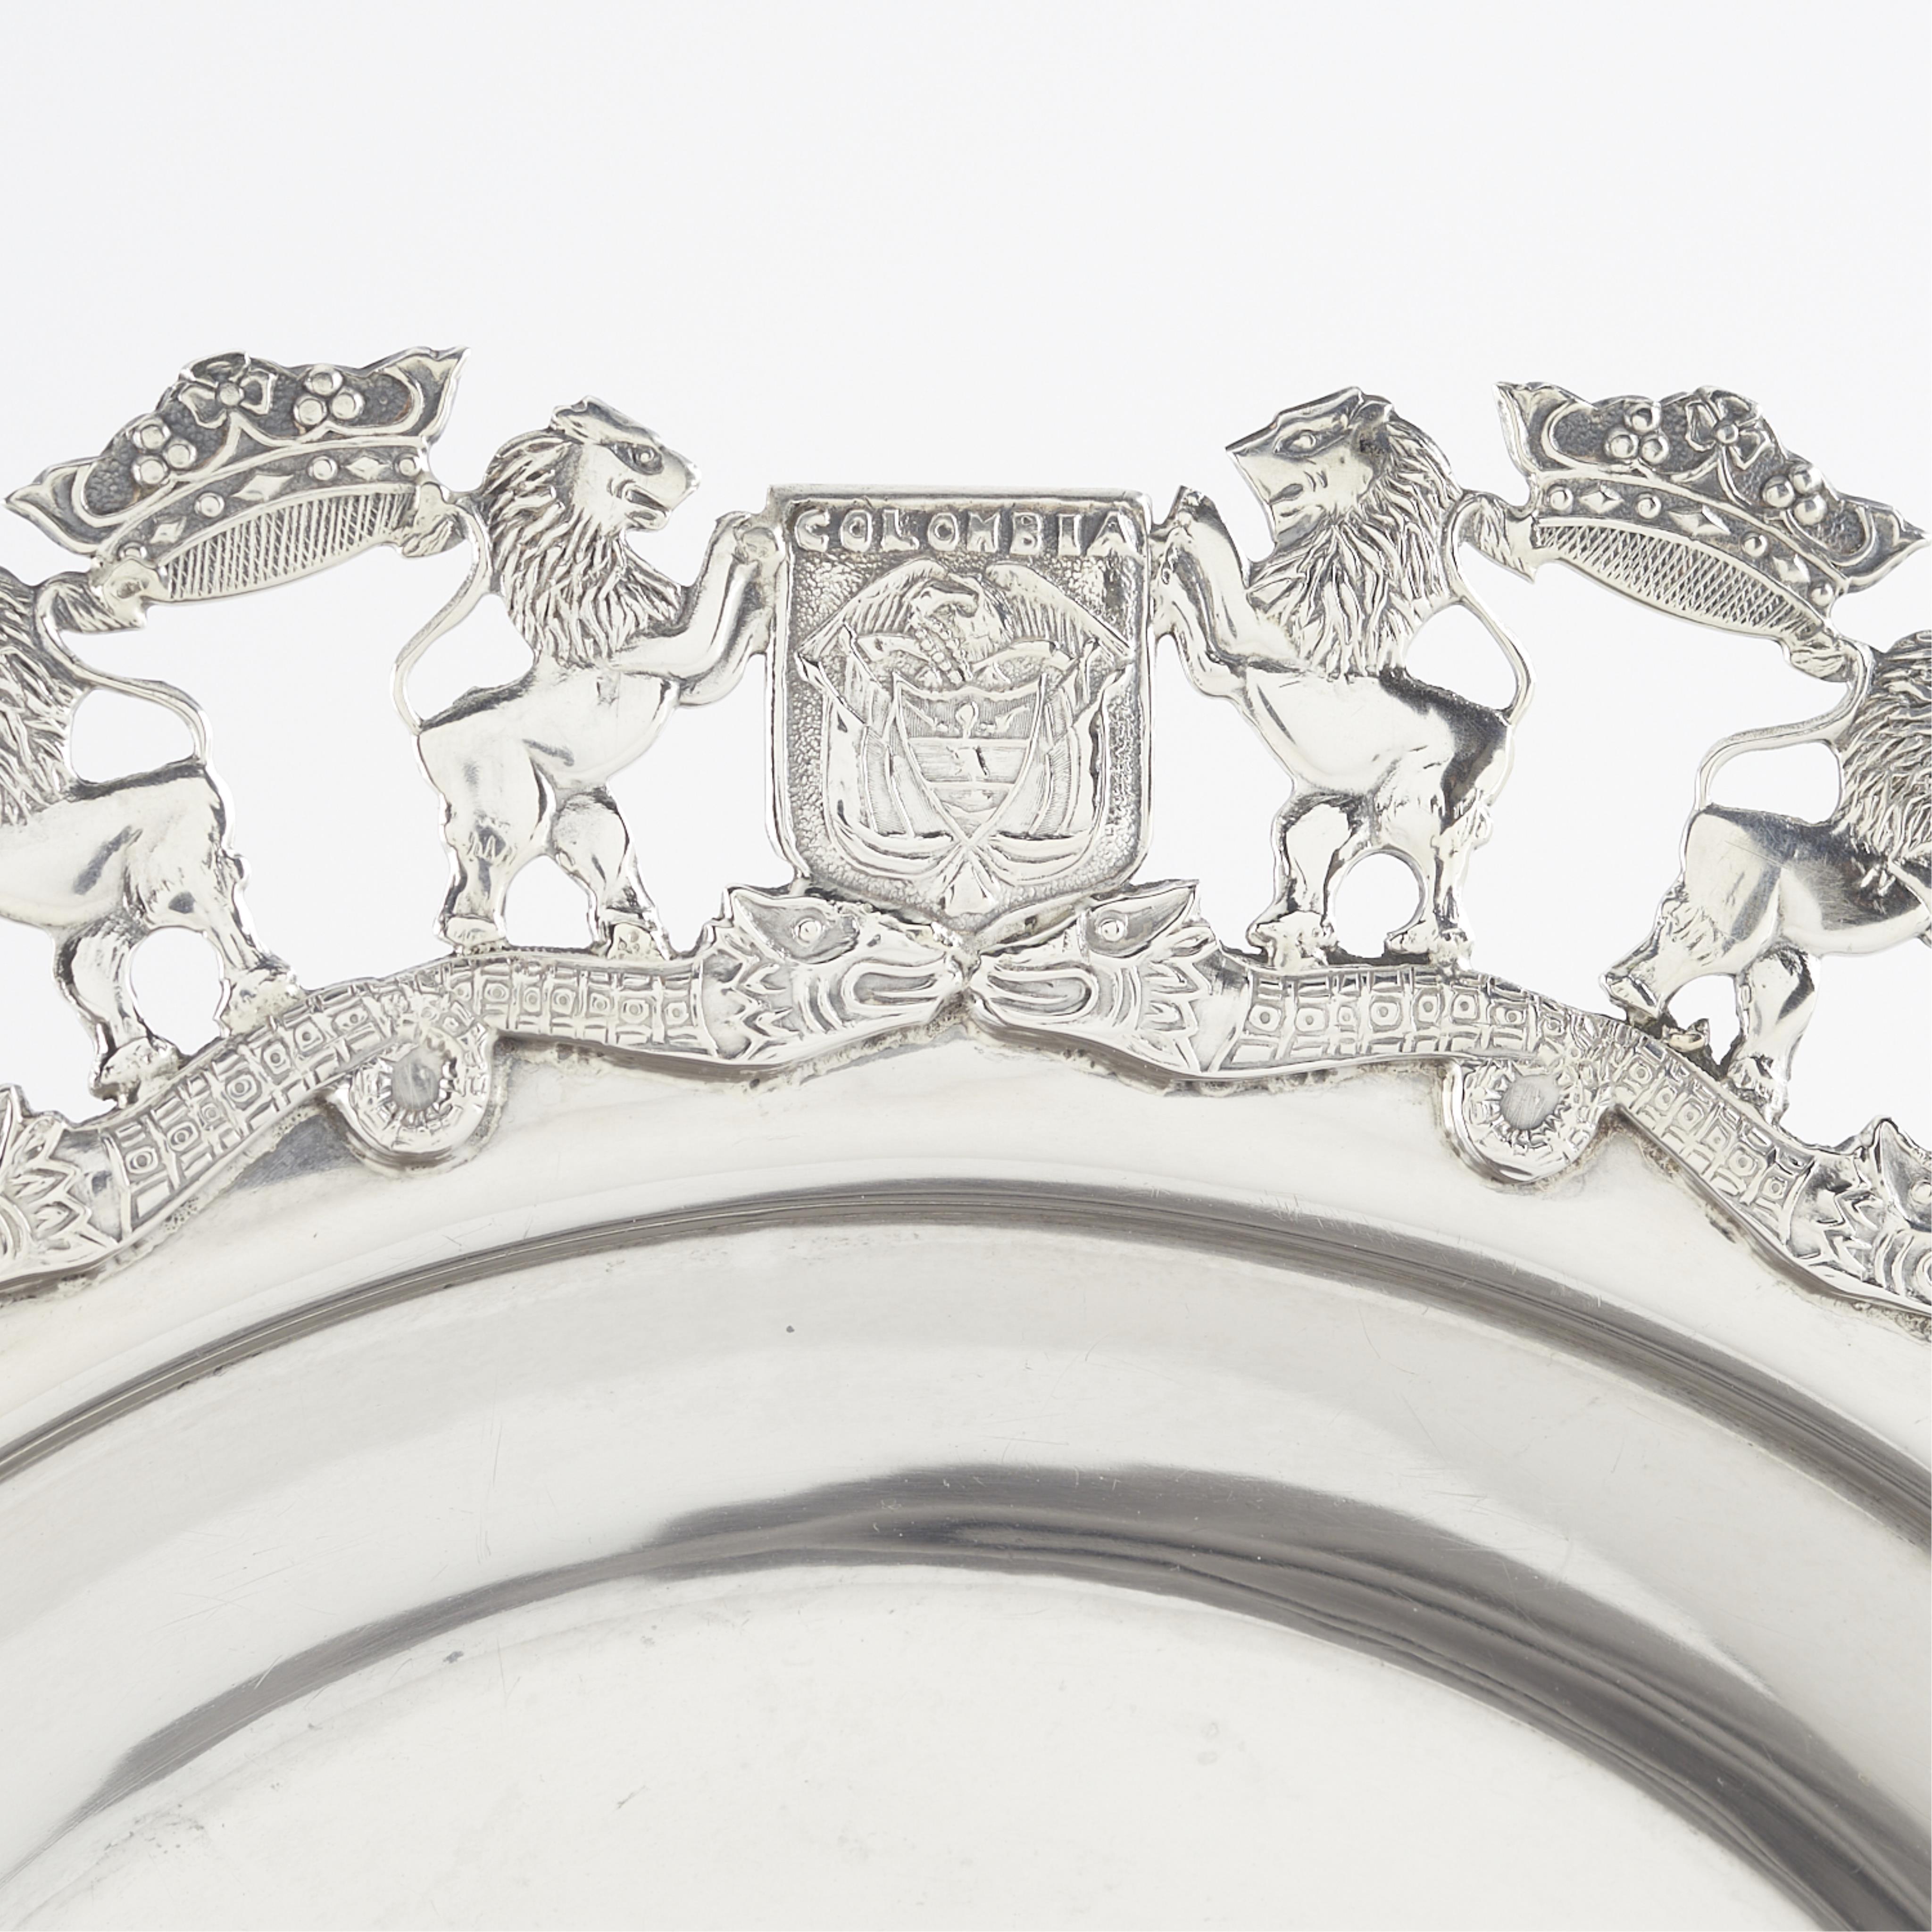 900 Silver Platter w/ Colombian Cities' Seals - Image 5 of 6